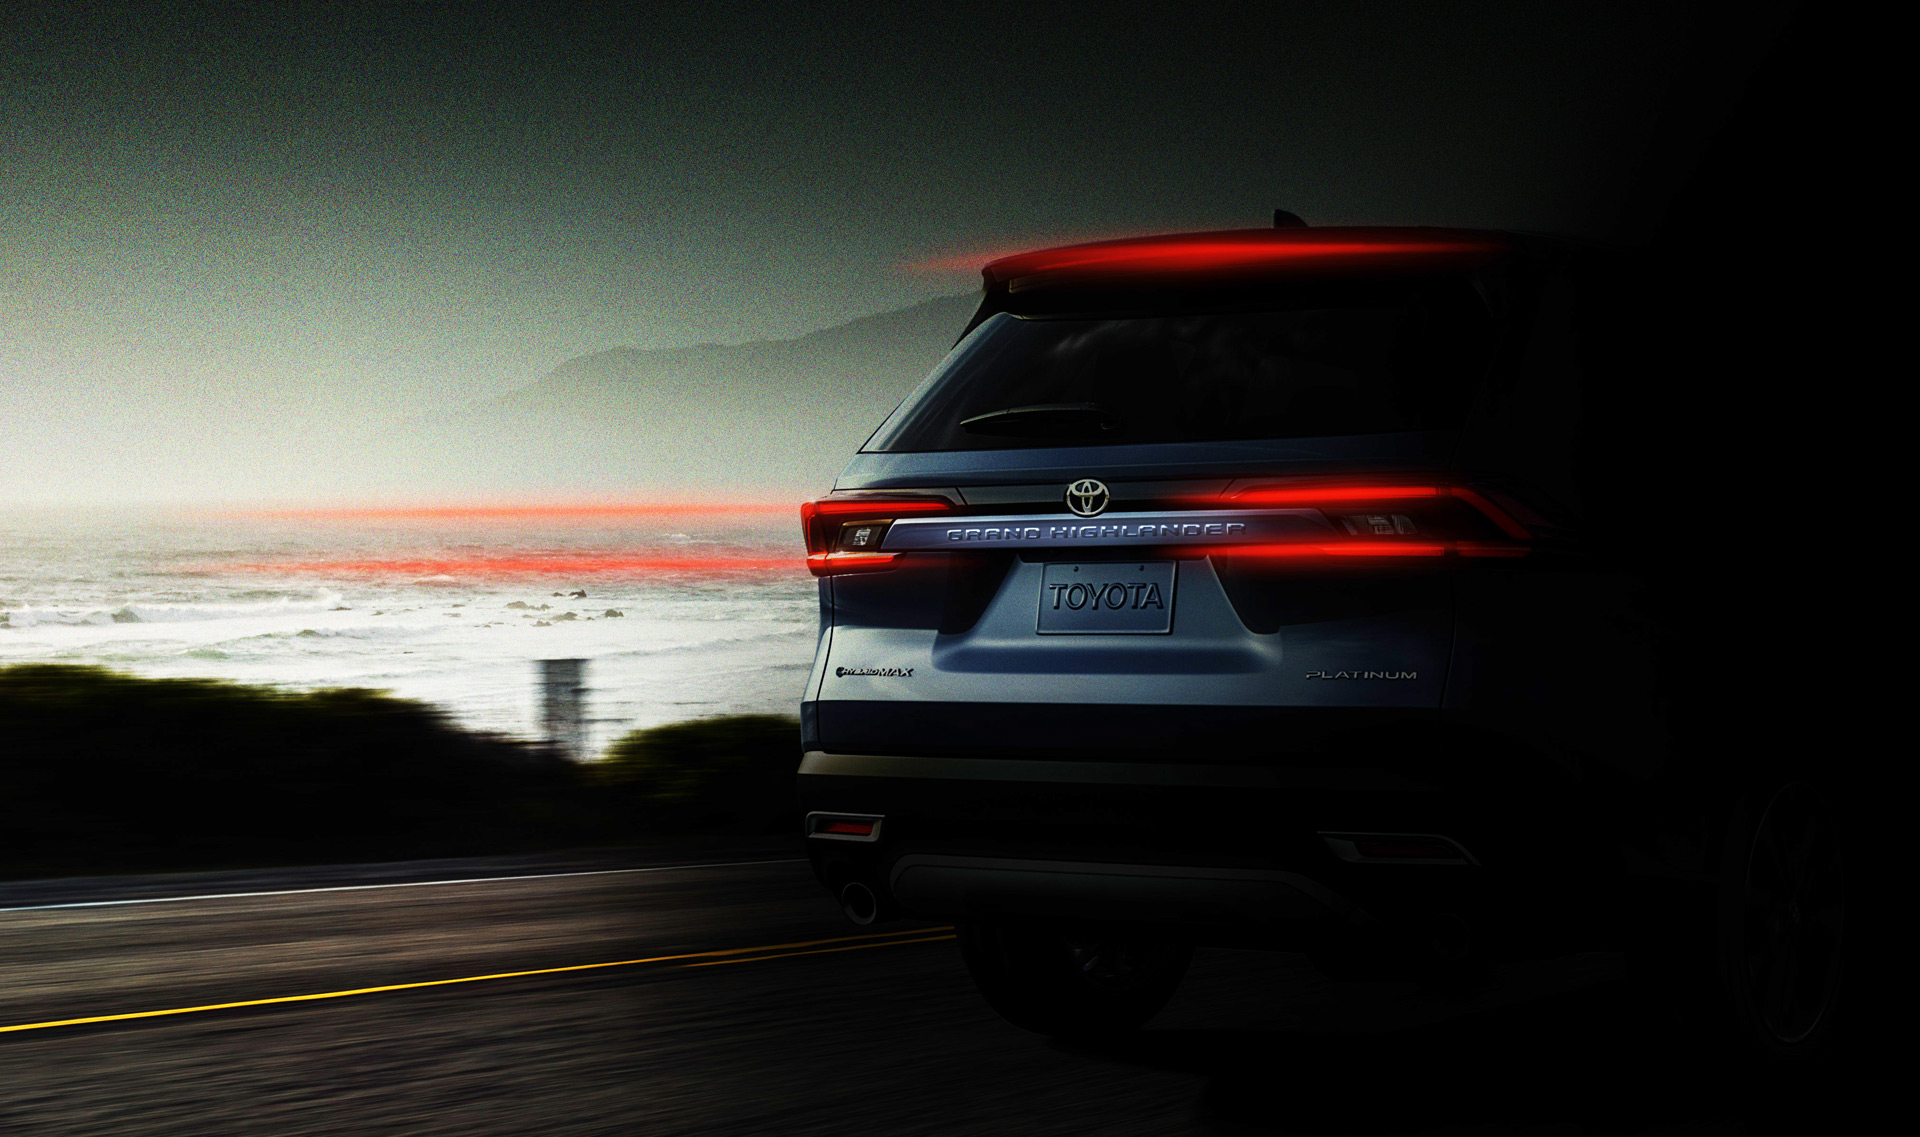 The 2024 Toyota Grand Highlander was teased ahead of its